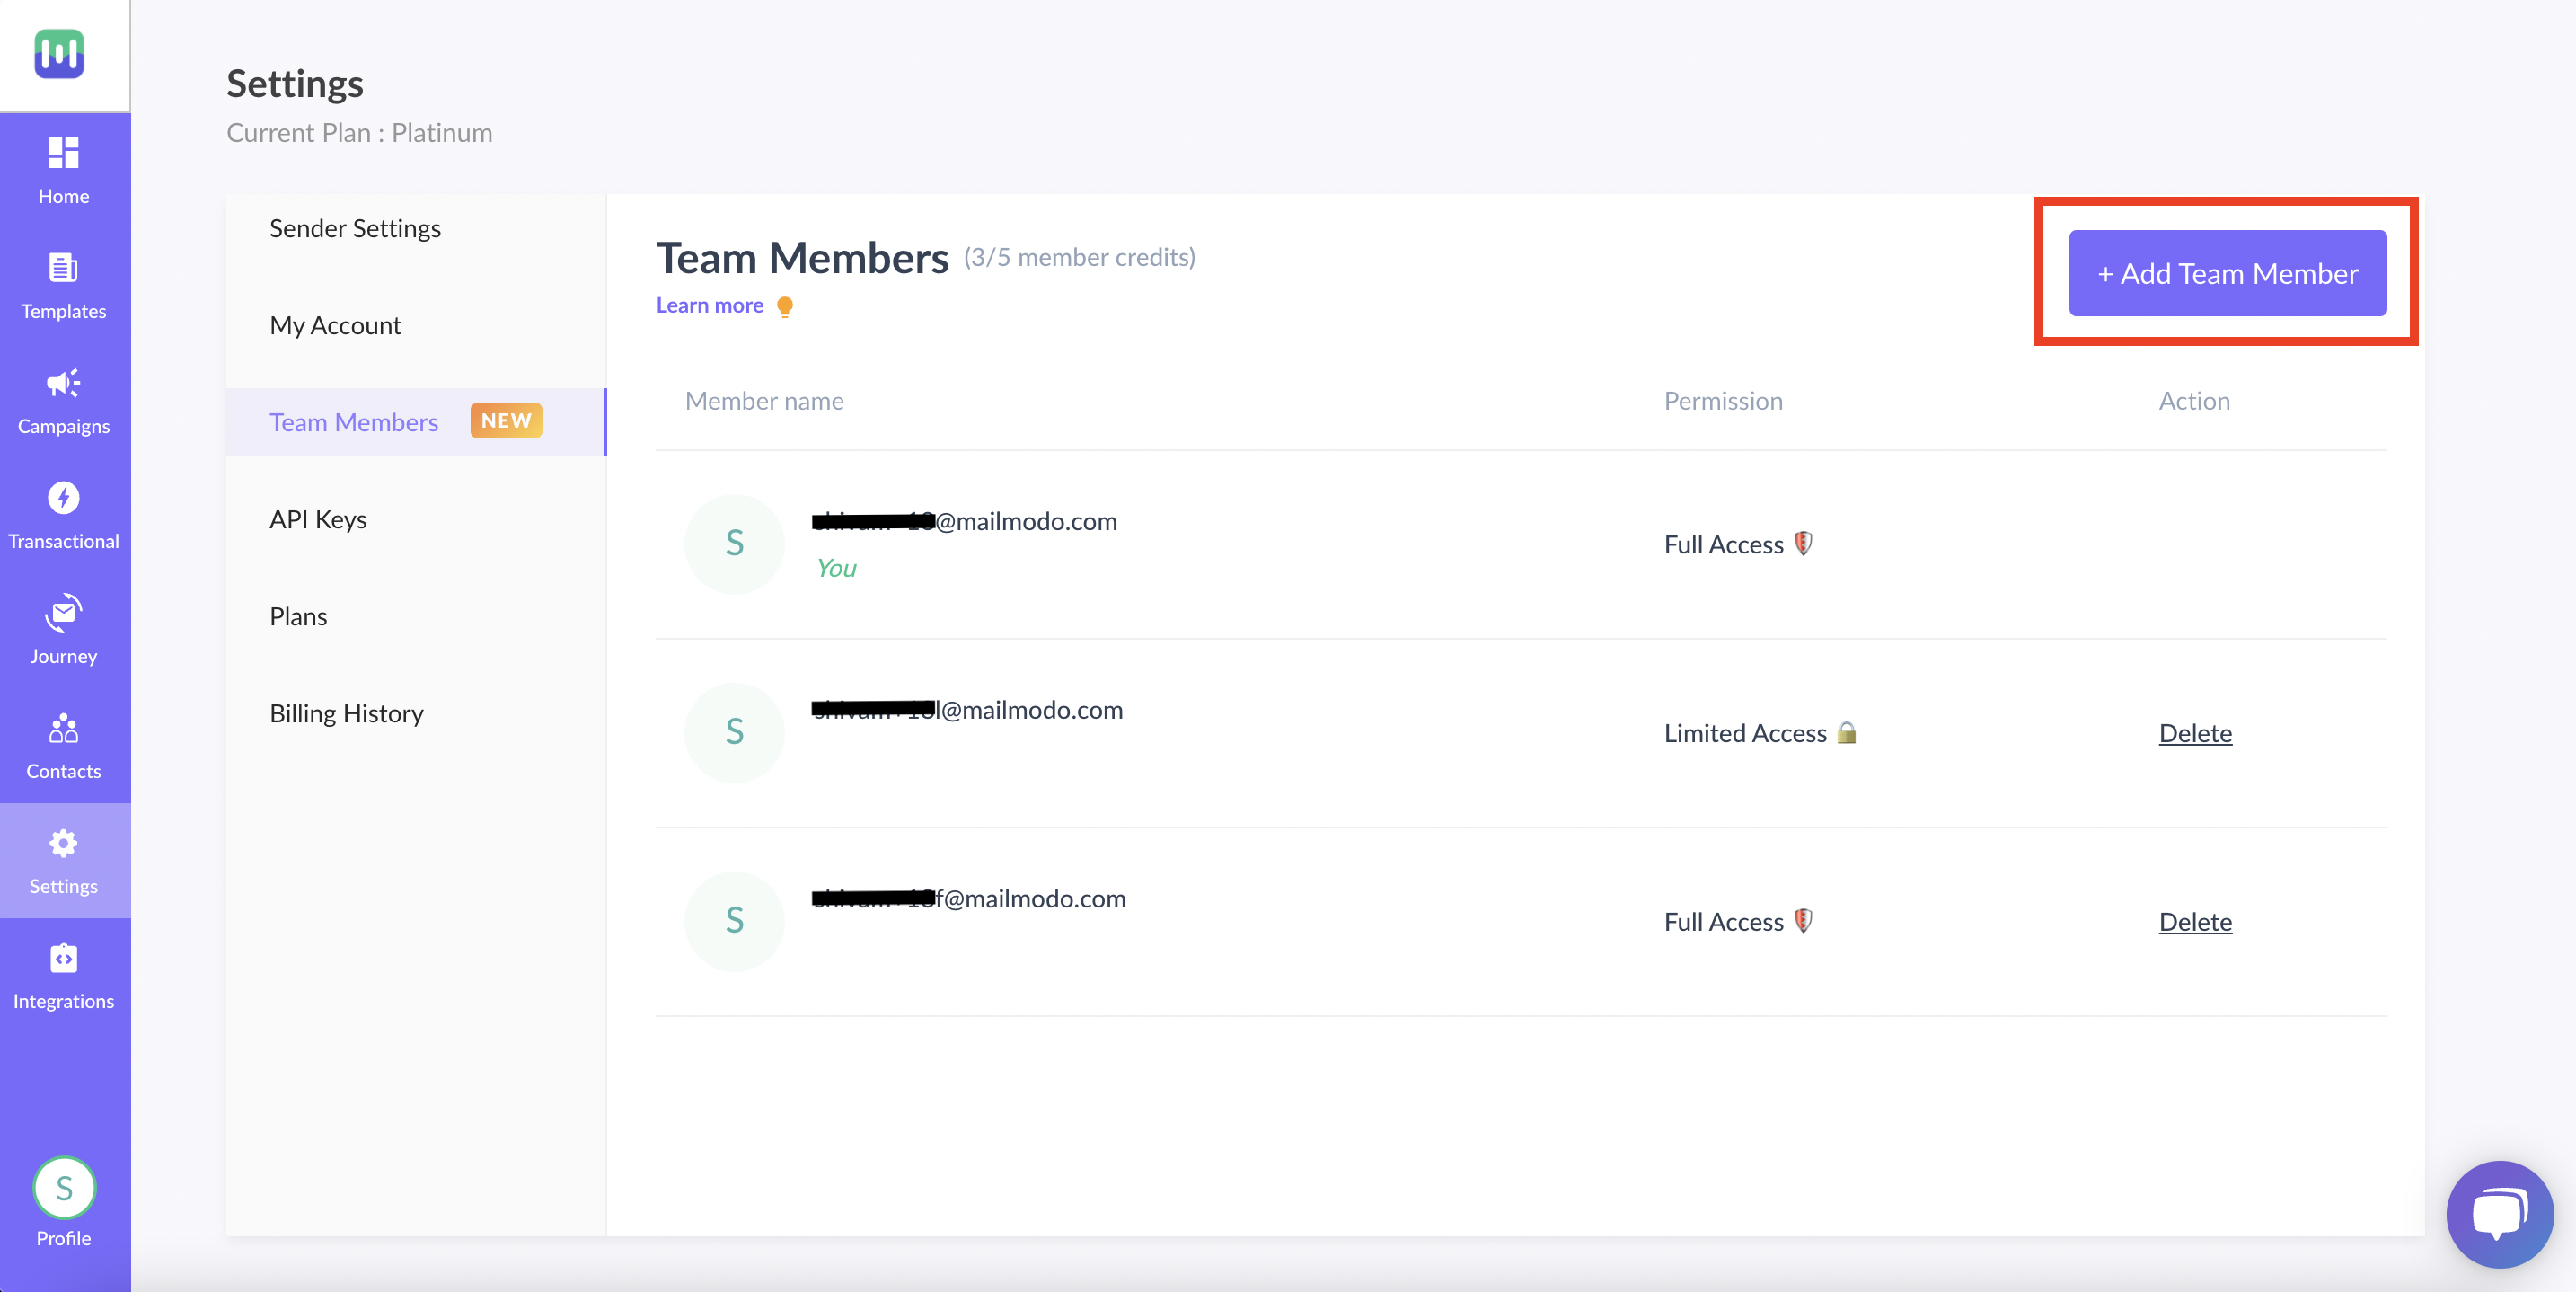 How to add or delete team members from your account?